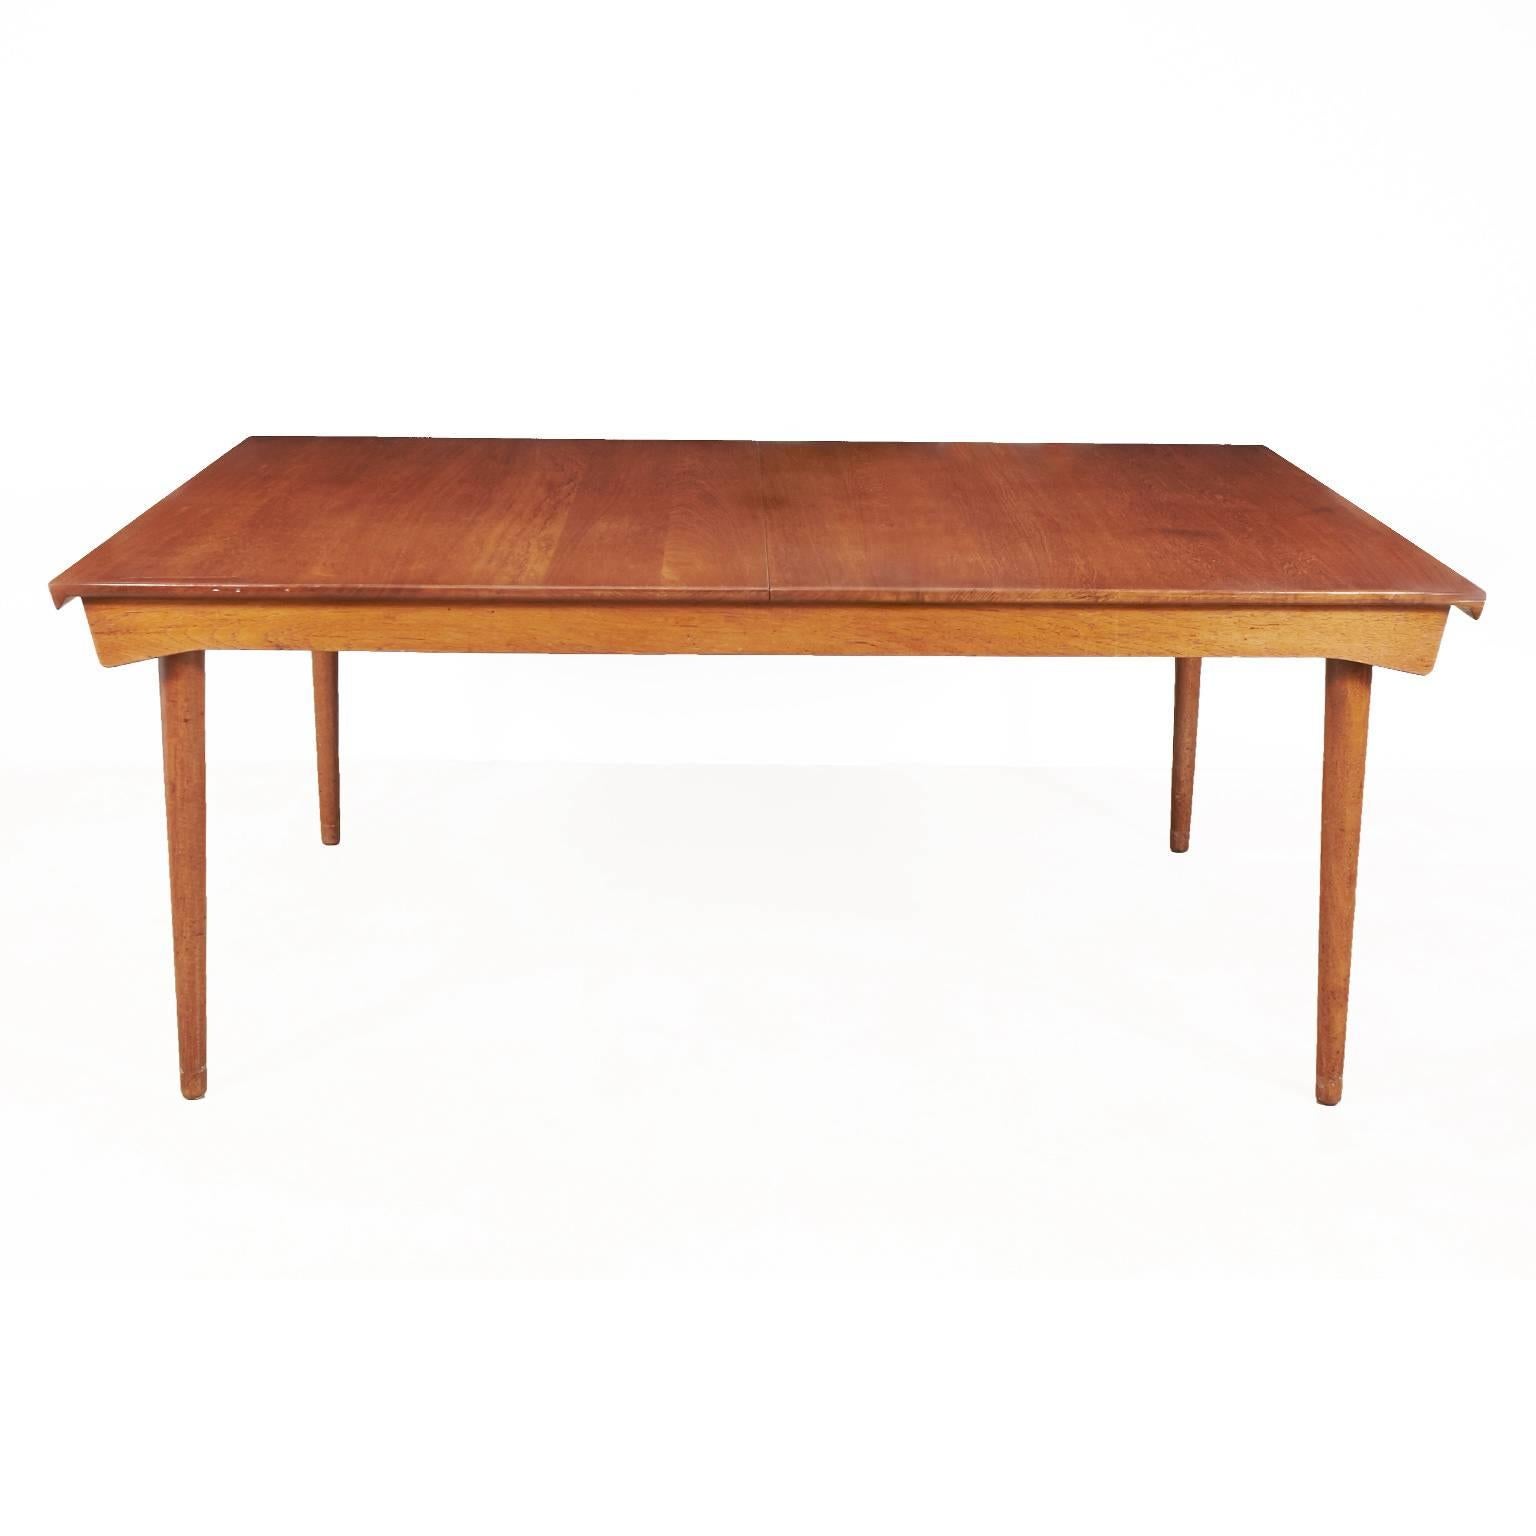 Beautiful solid teak Finn Juhl model FD 540 dining table by France & Son imported by John Stuart, has round John Stuart label on underside of table.
The table has two self stored leaves which are hidden when table is closed. Table is 67 inches long